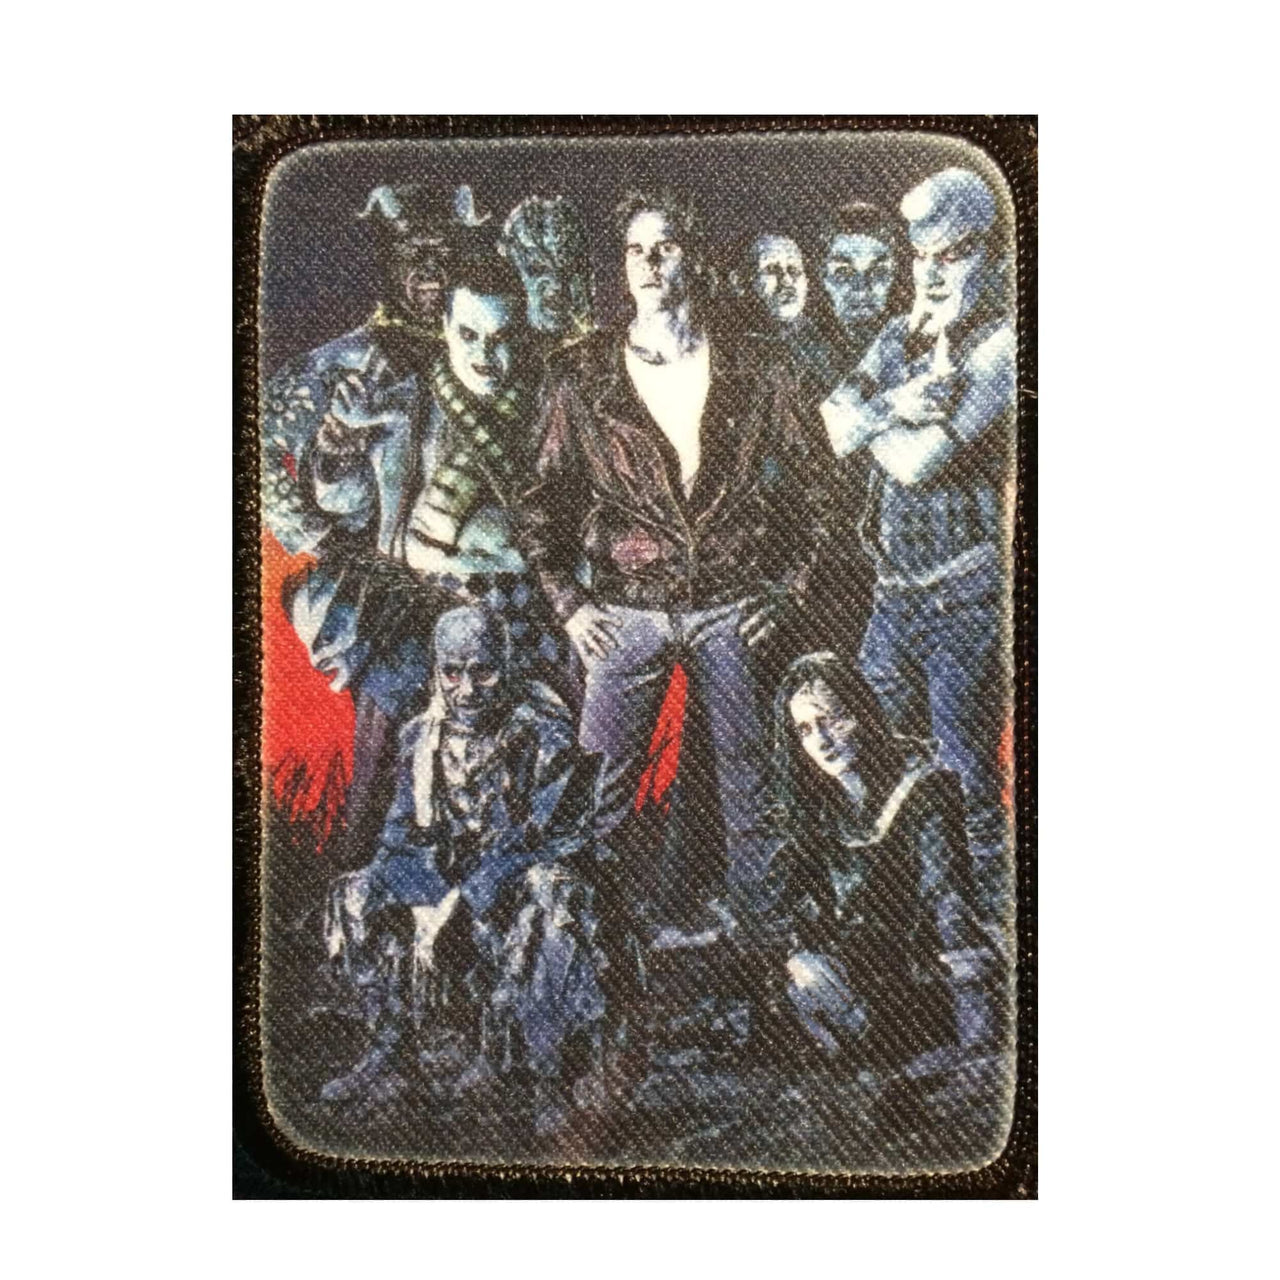 Nightbreed Patch